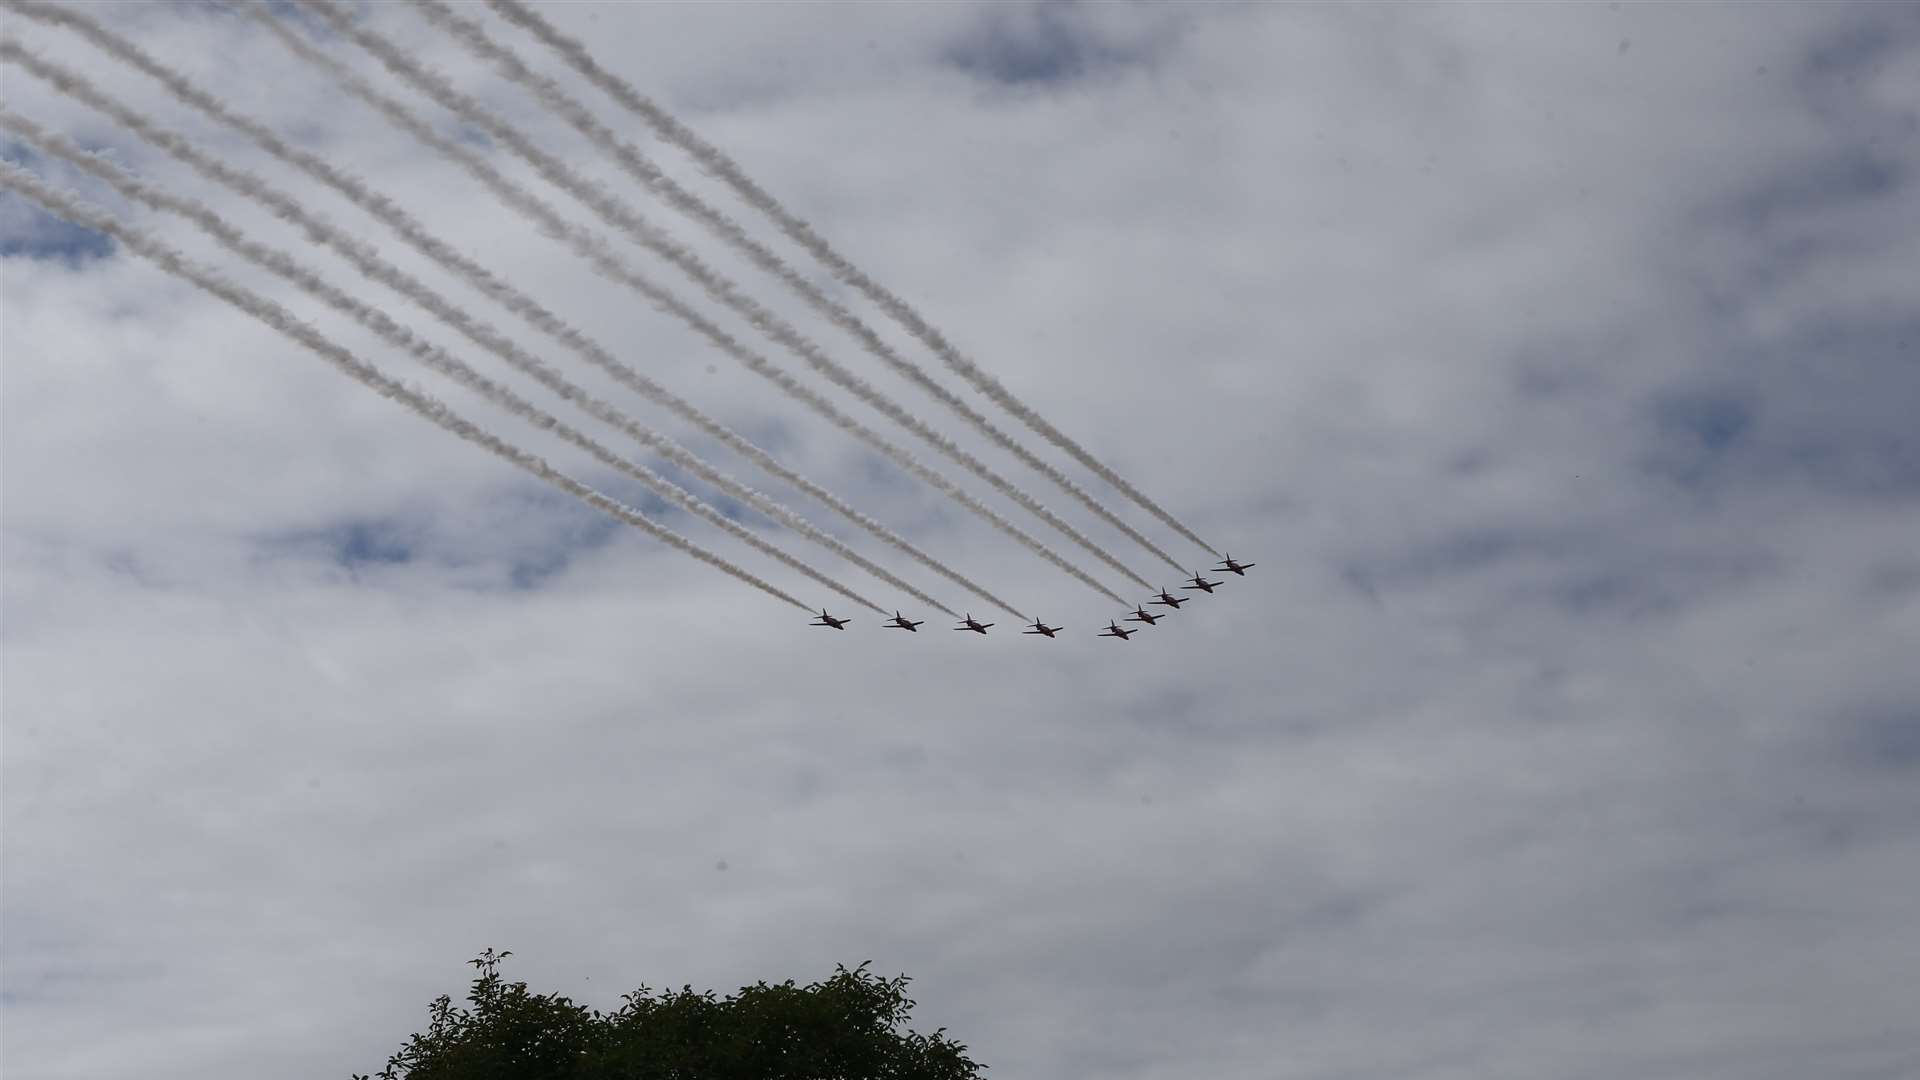 The Red Arrows fly over George's home in Broomfield